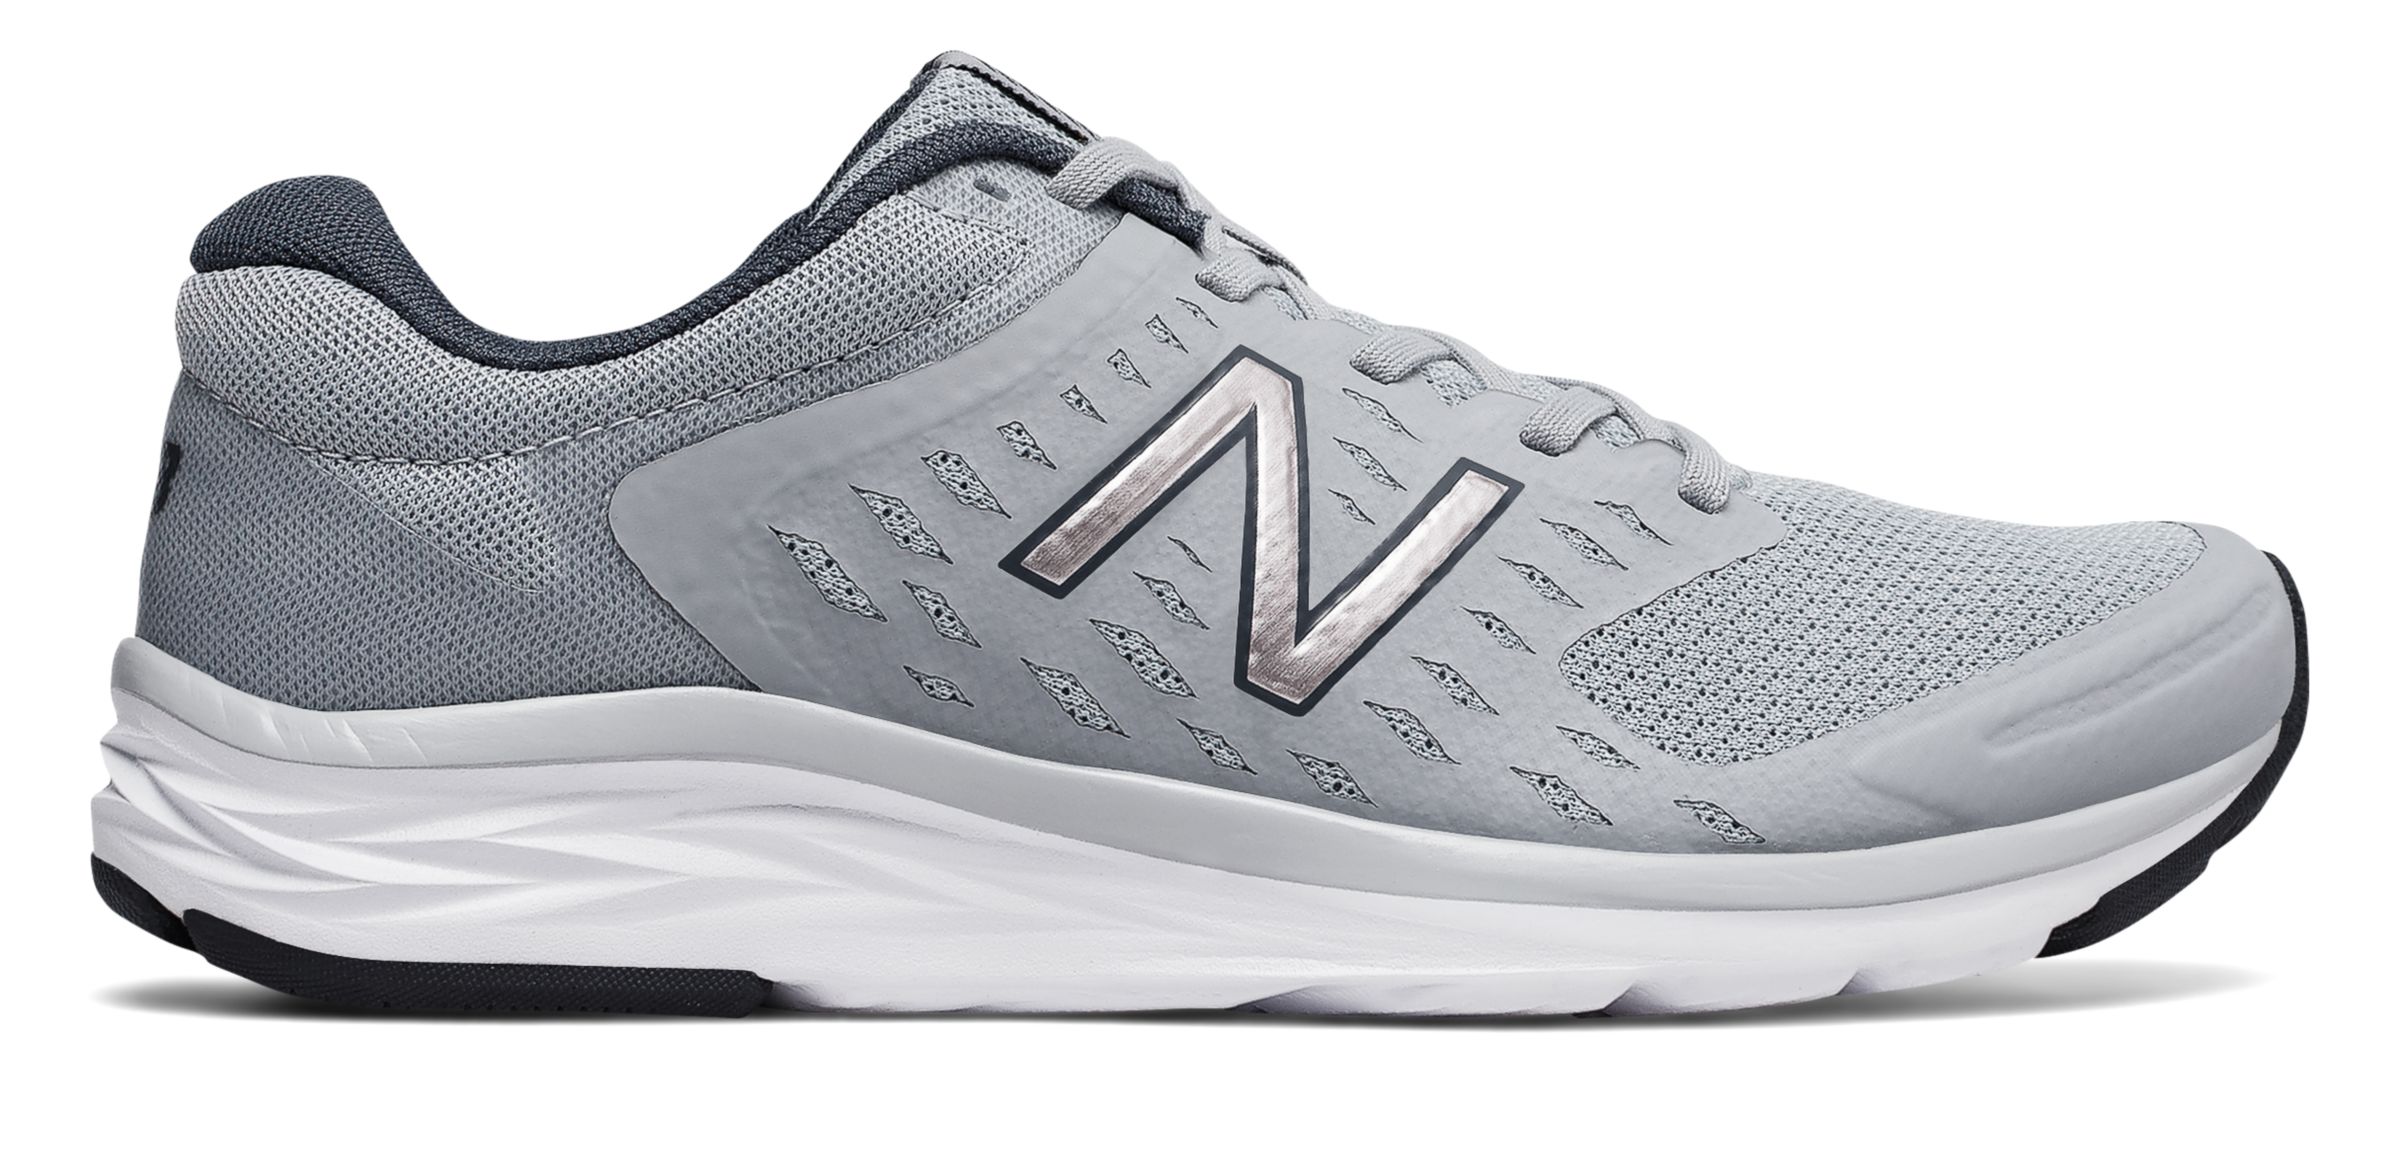 New Balance W490-V5 on Sale - Discounts Up to 20% Off on W490LG5 at Joe's New  Balance Outlet